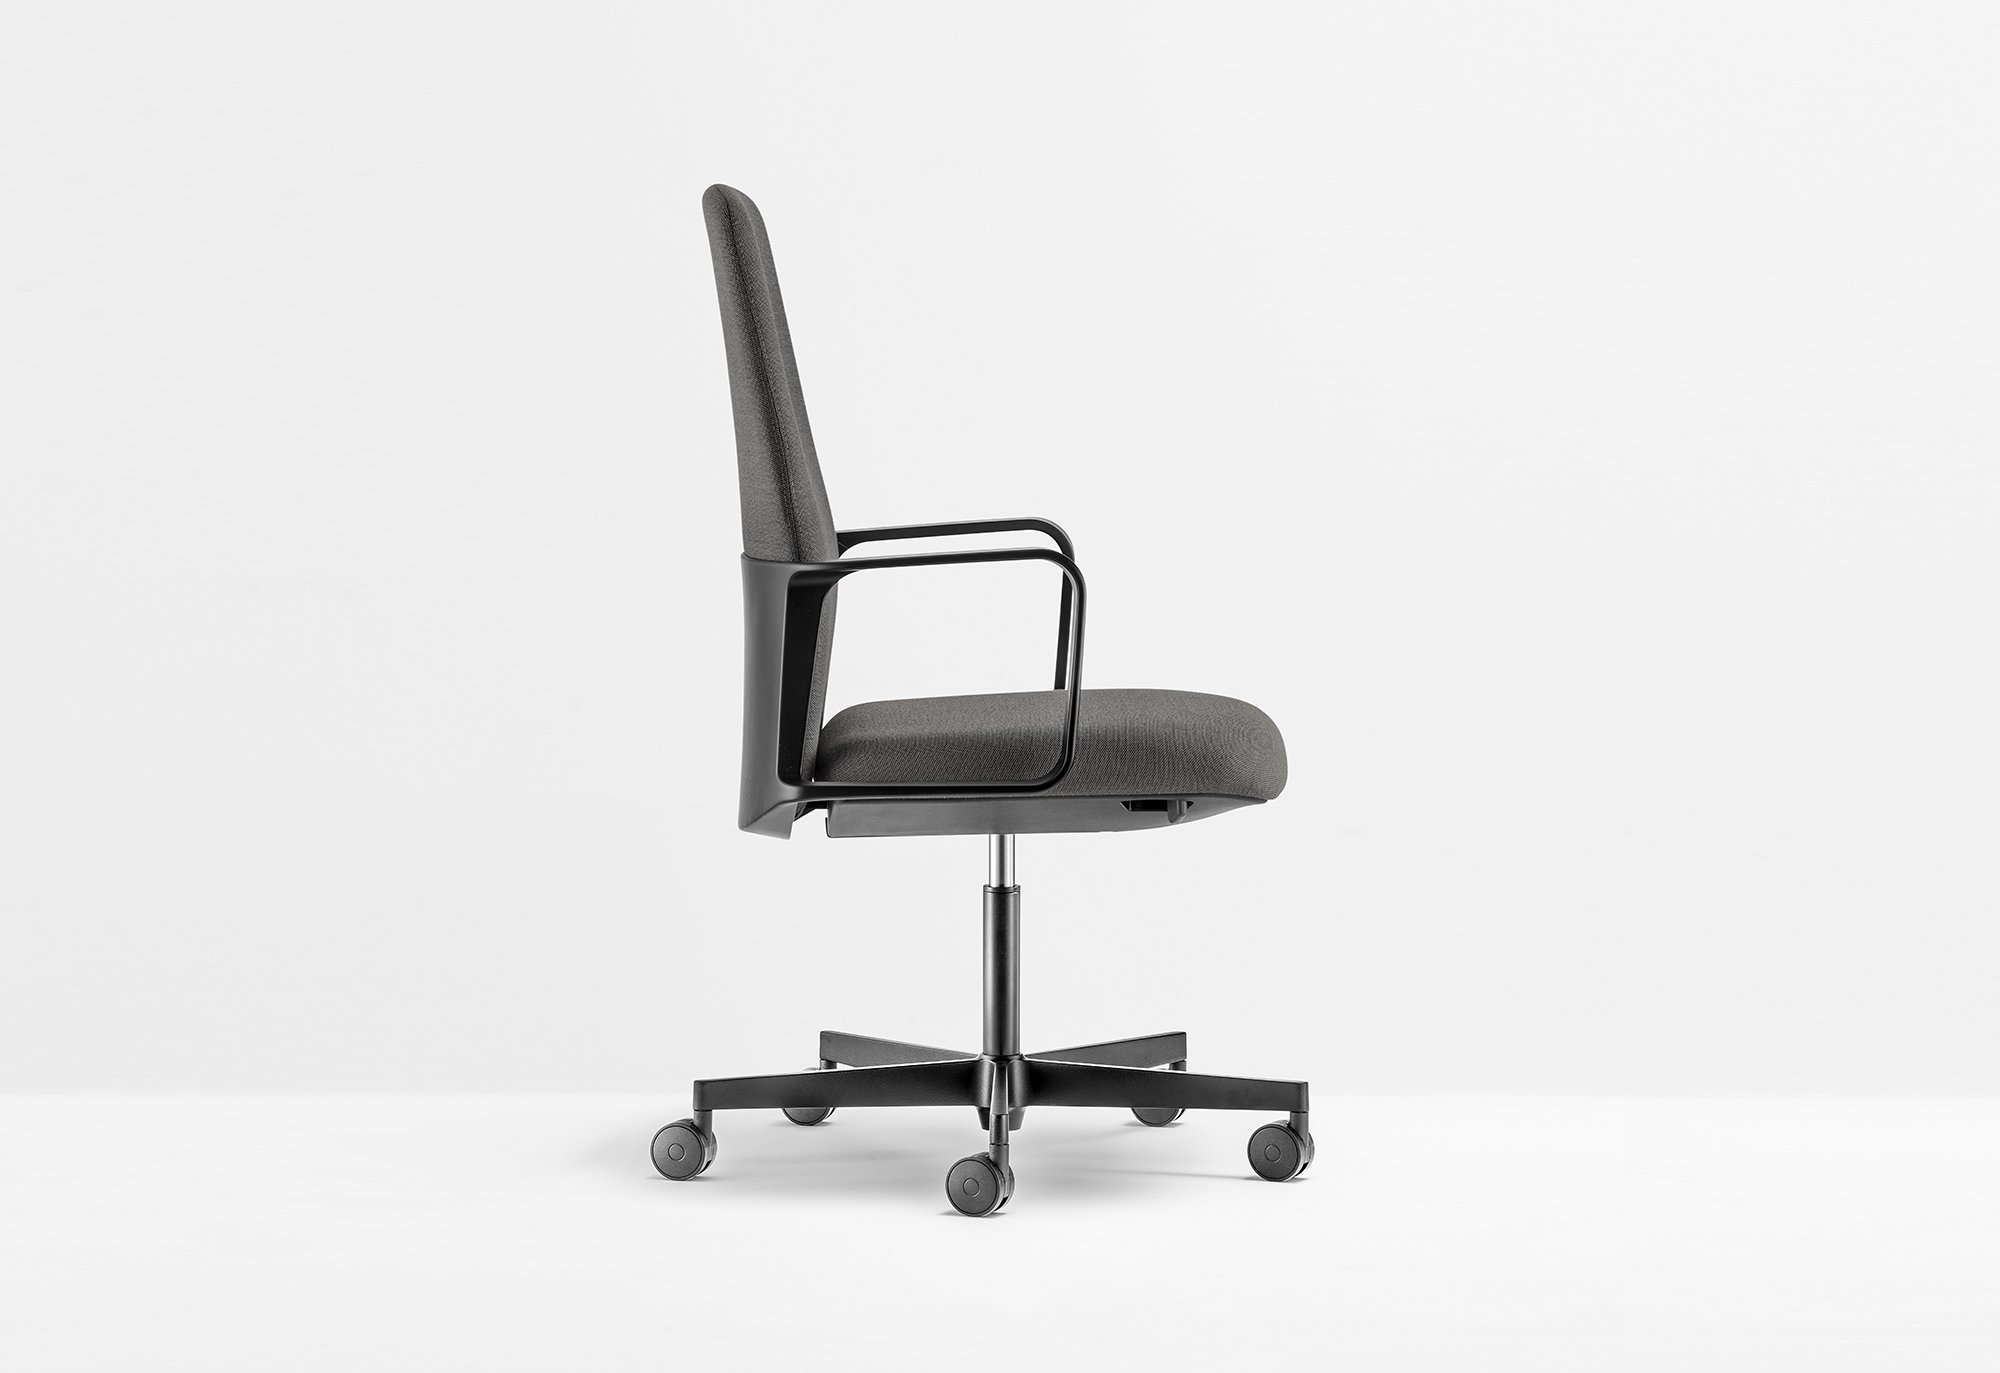 TEMPS 3765 Office Chair from Pedrali, designed by Jorge Pensi